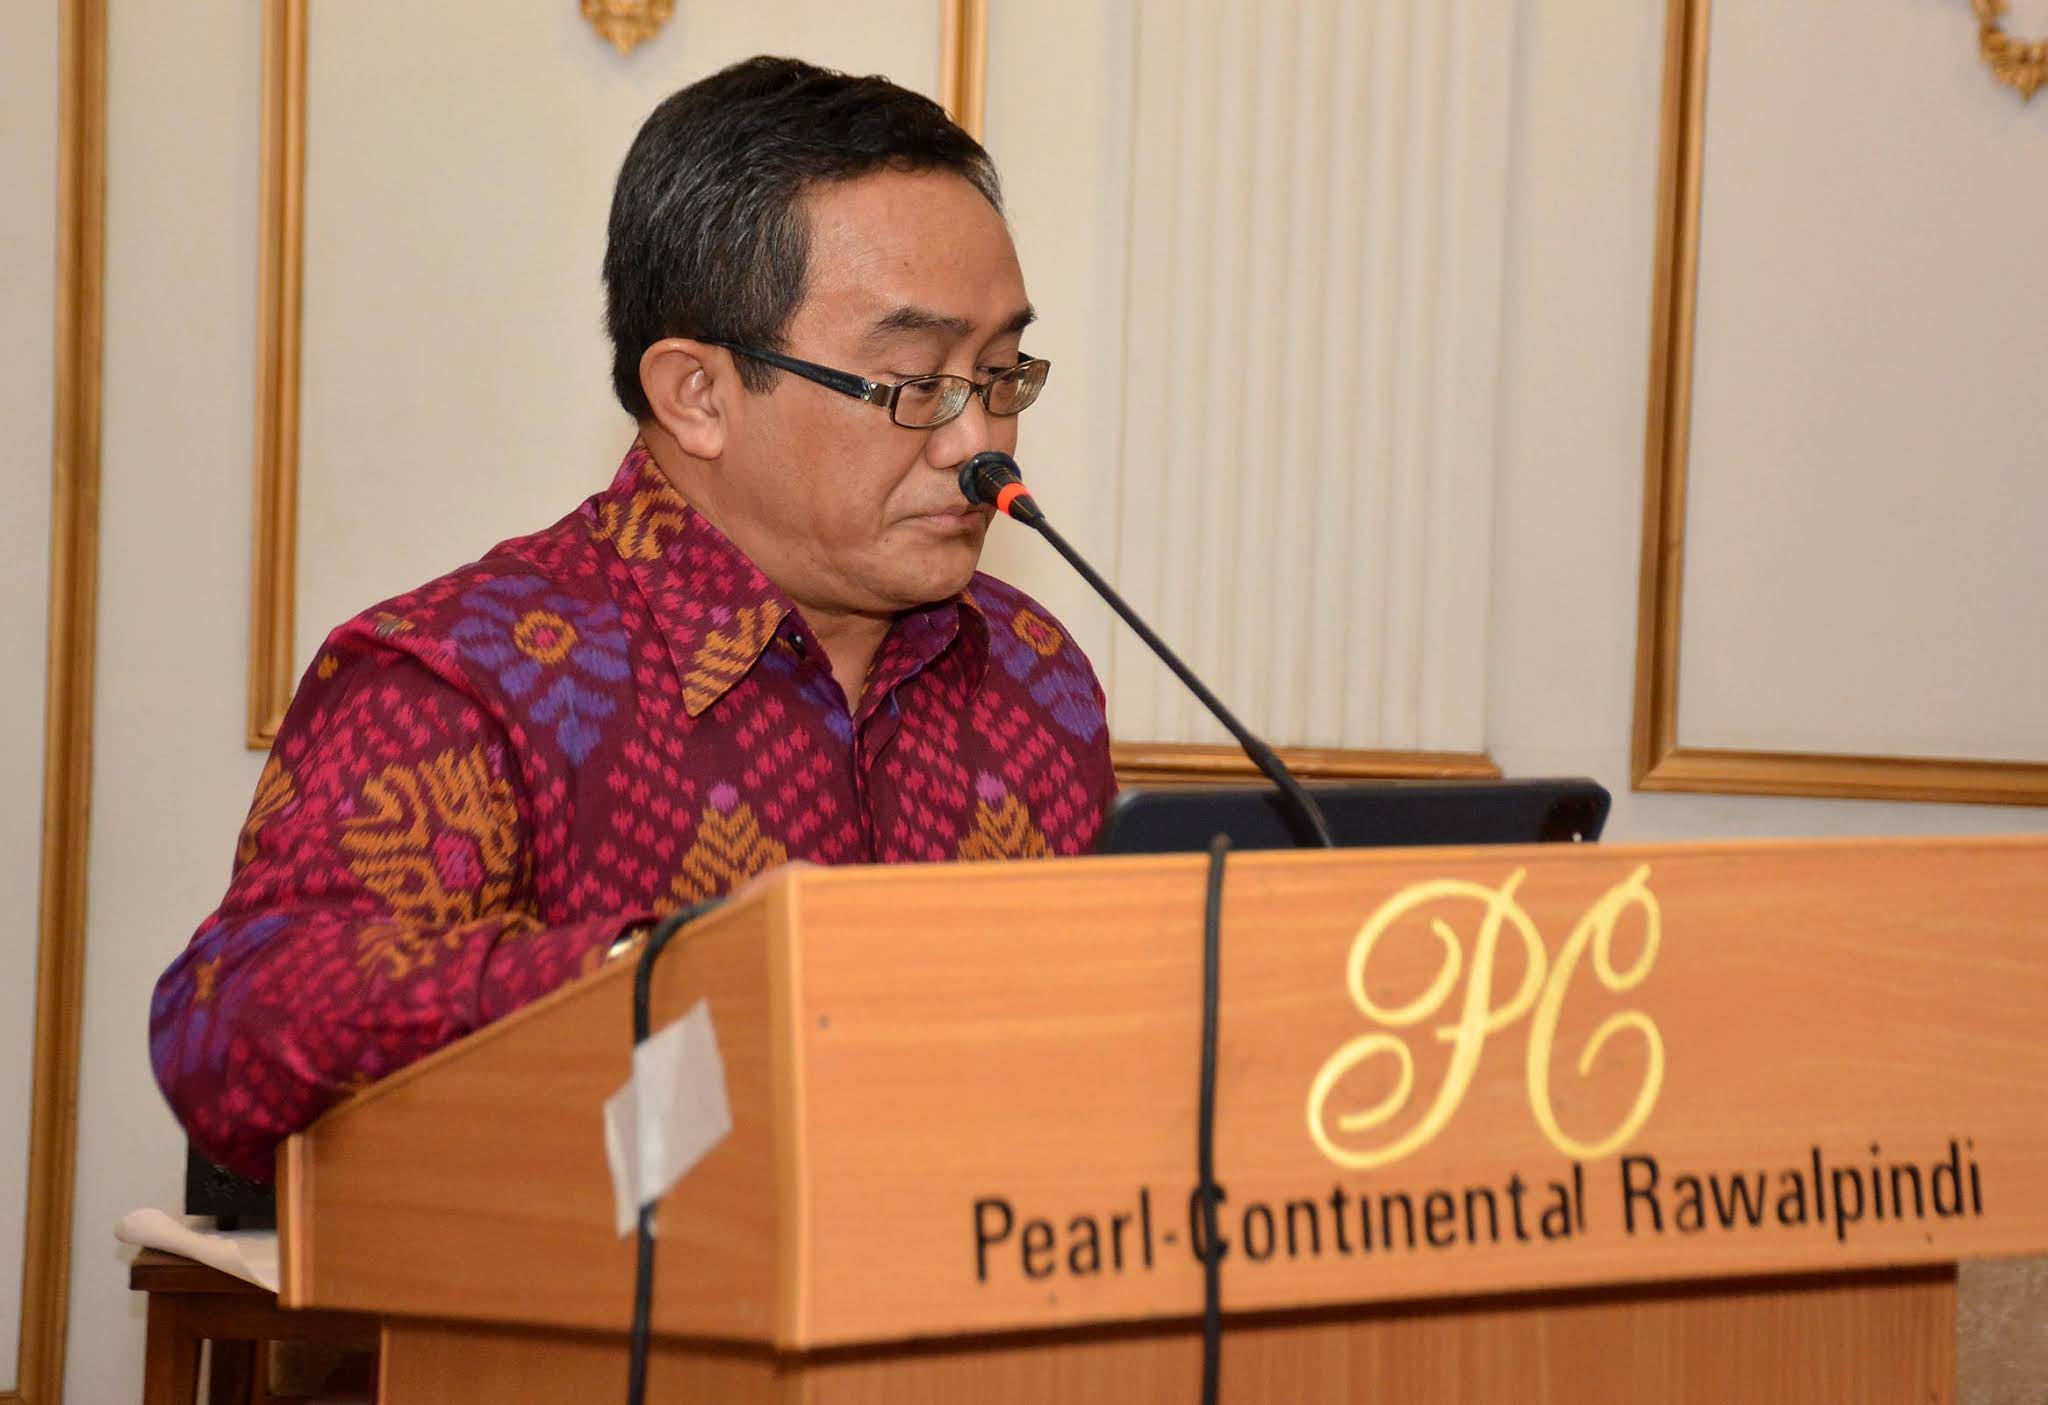 Indonesia and Pakistan stand proudly together: Andi Bastari